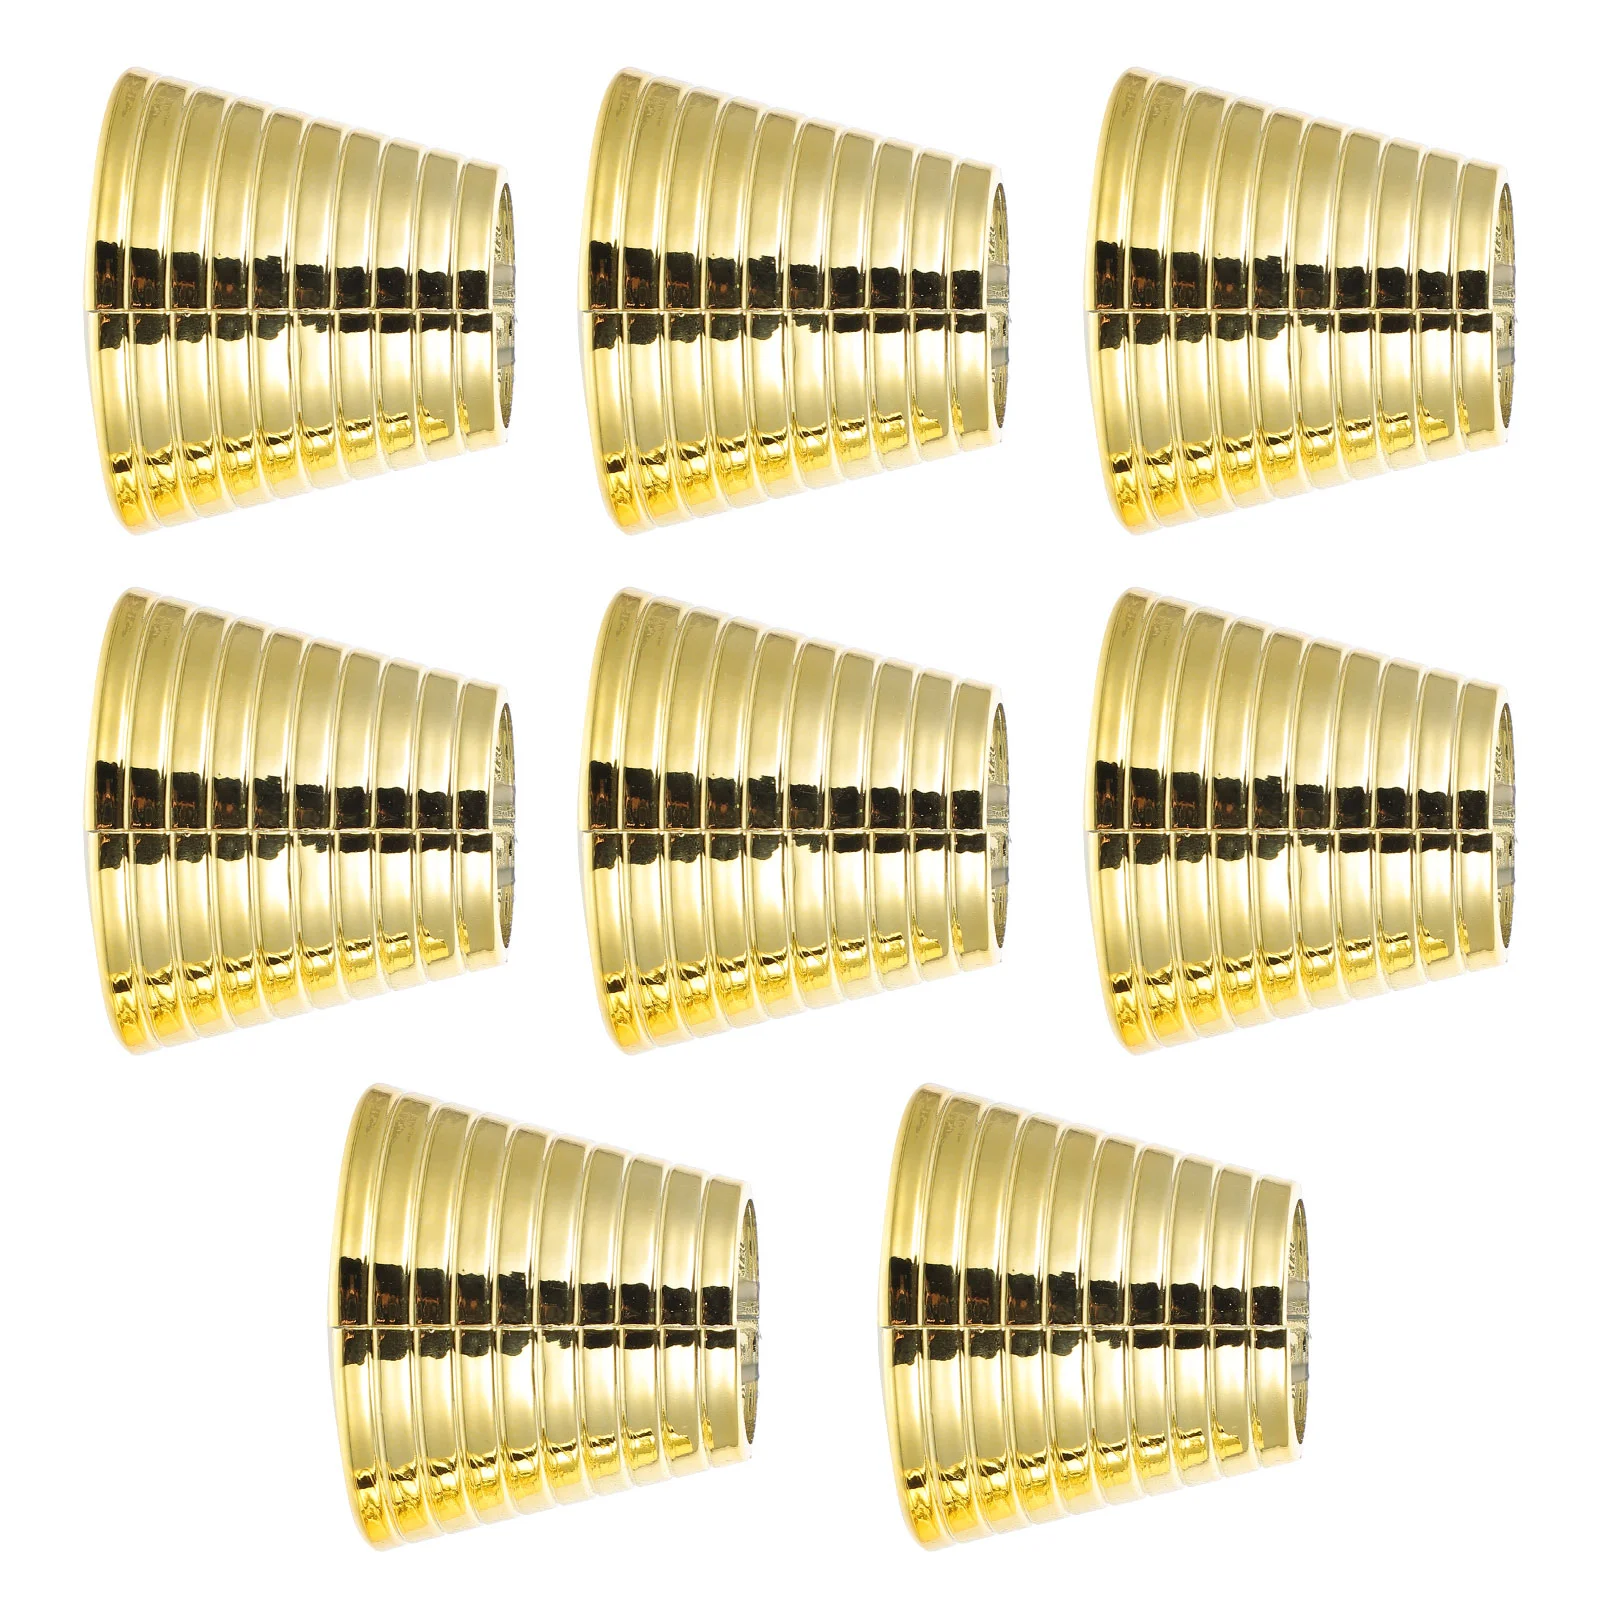 

8 Pcs Gold Decor Ponytail Gold Hair Accessories Holder Band Cuff Teeth Clip Buckles Barrette Circle Clips Miss